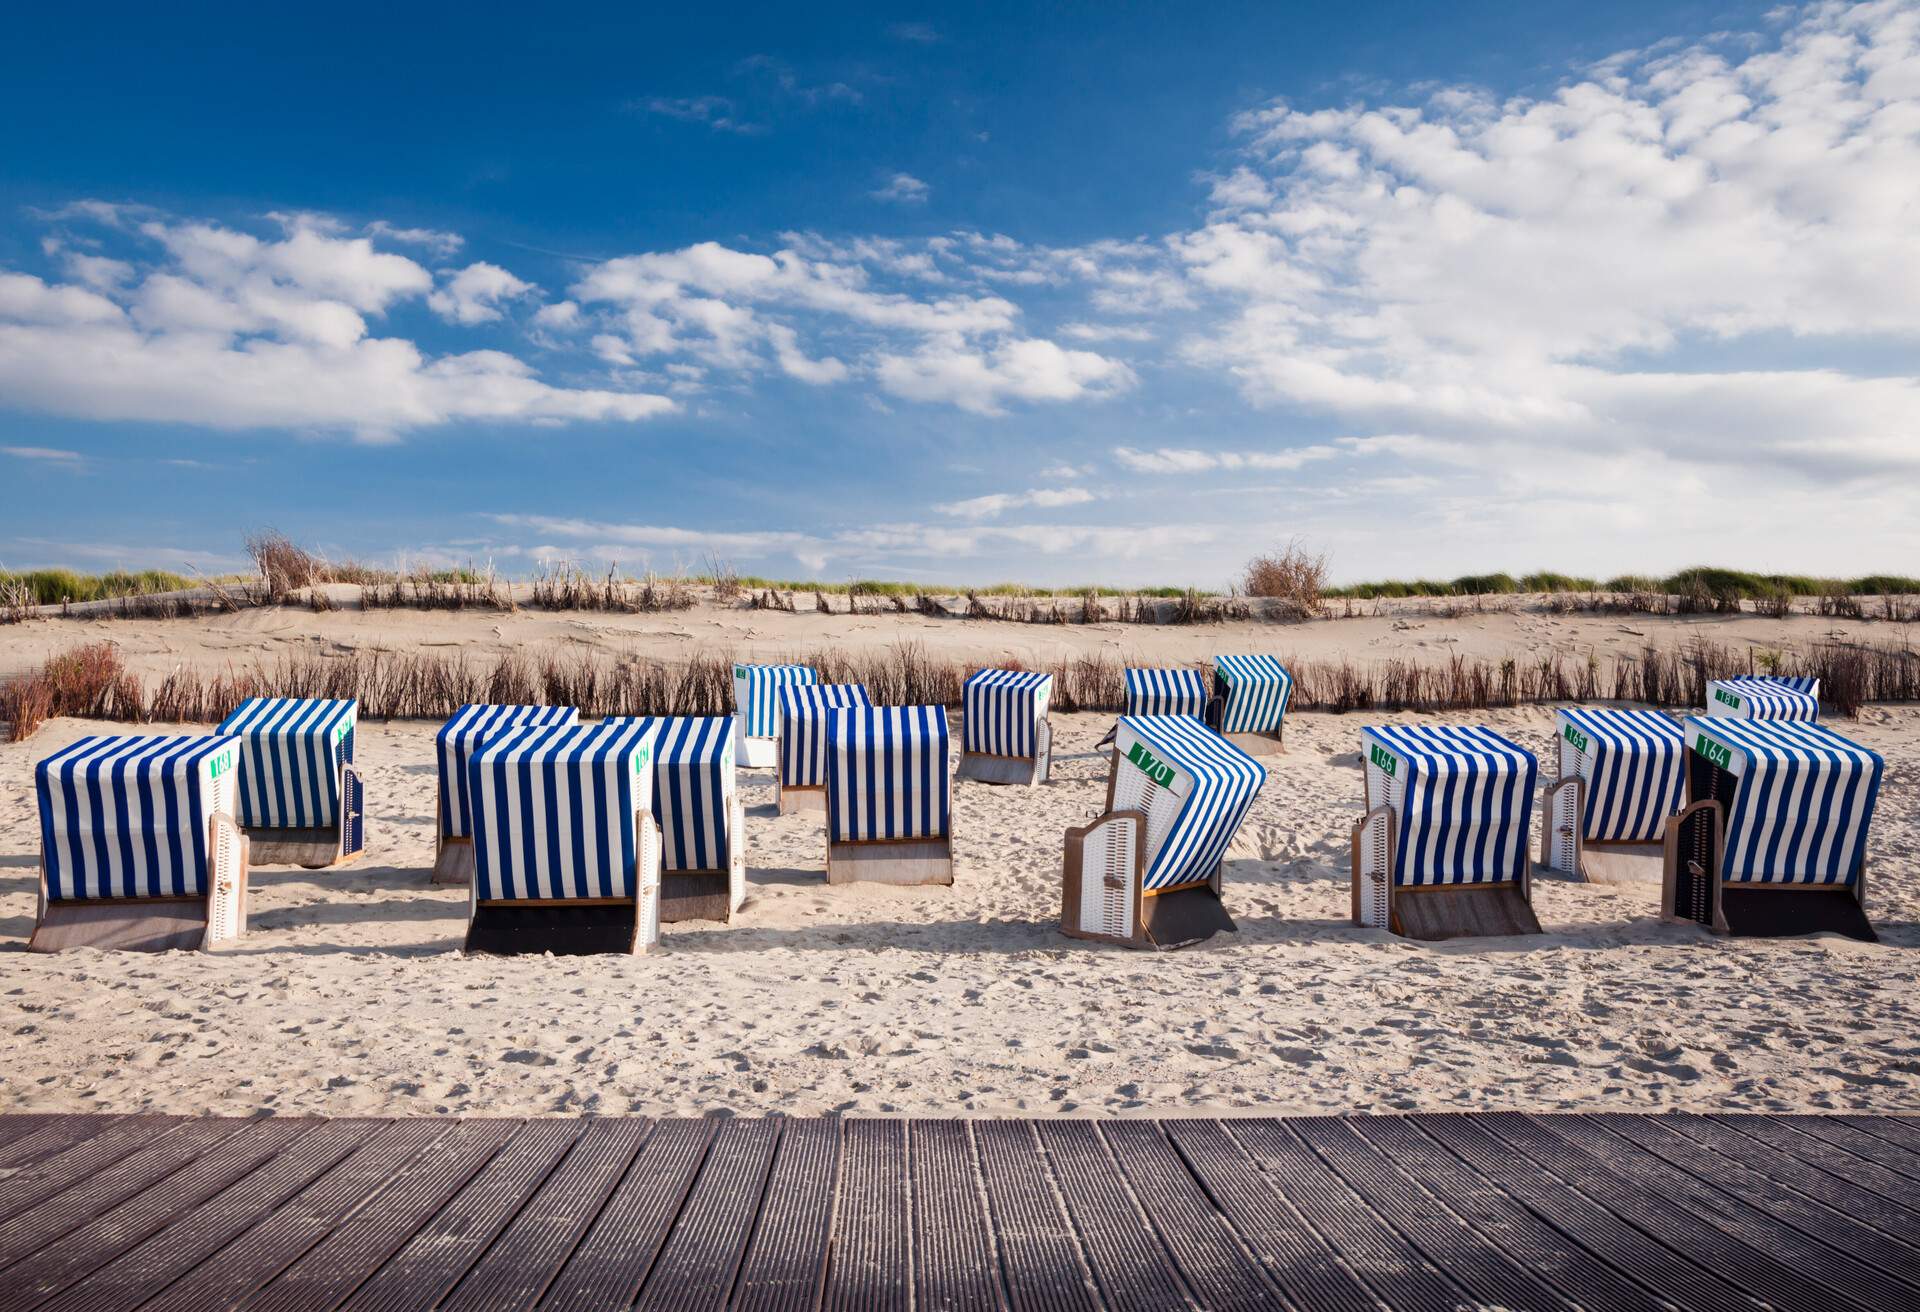 DEST_GERMANY_NORDERNEY_THEME_BEACH_GettyImages-511563625